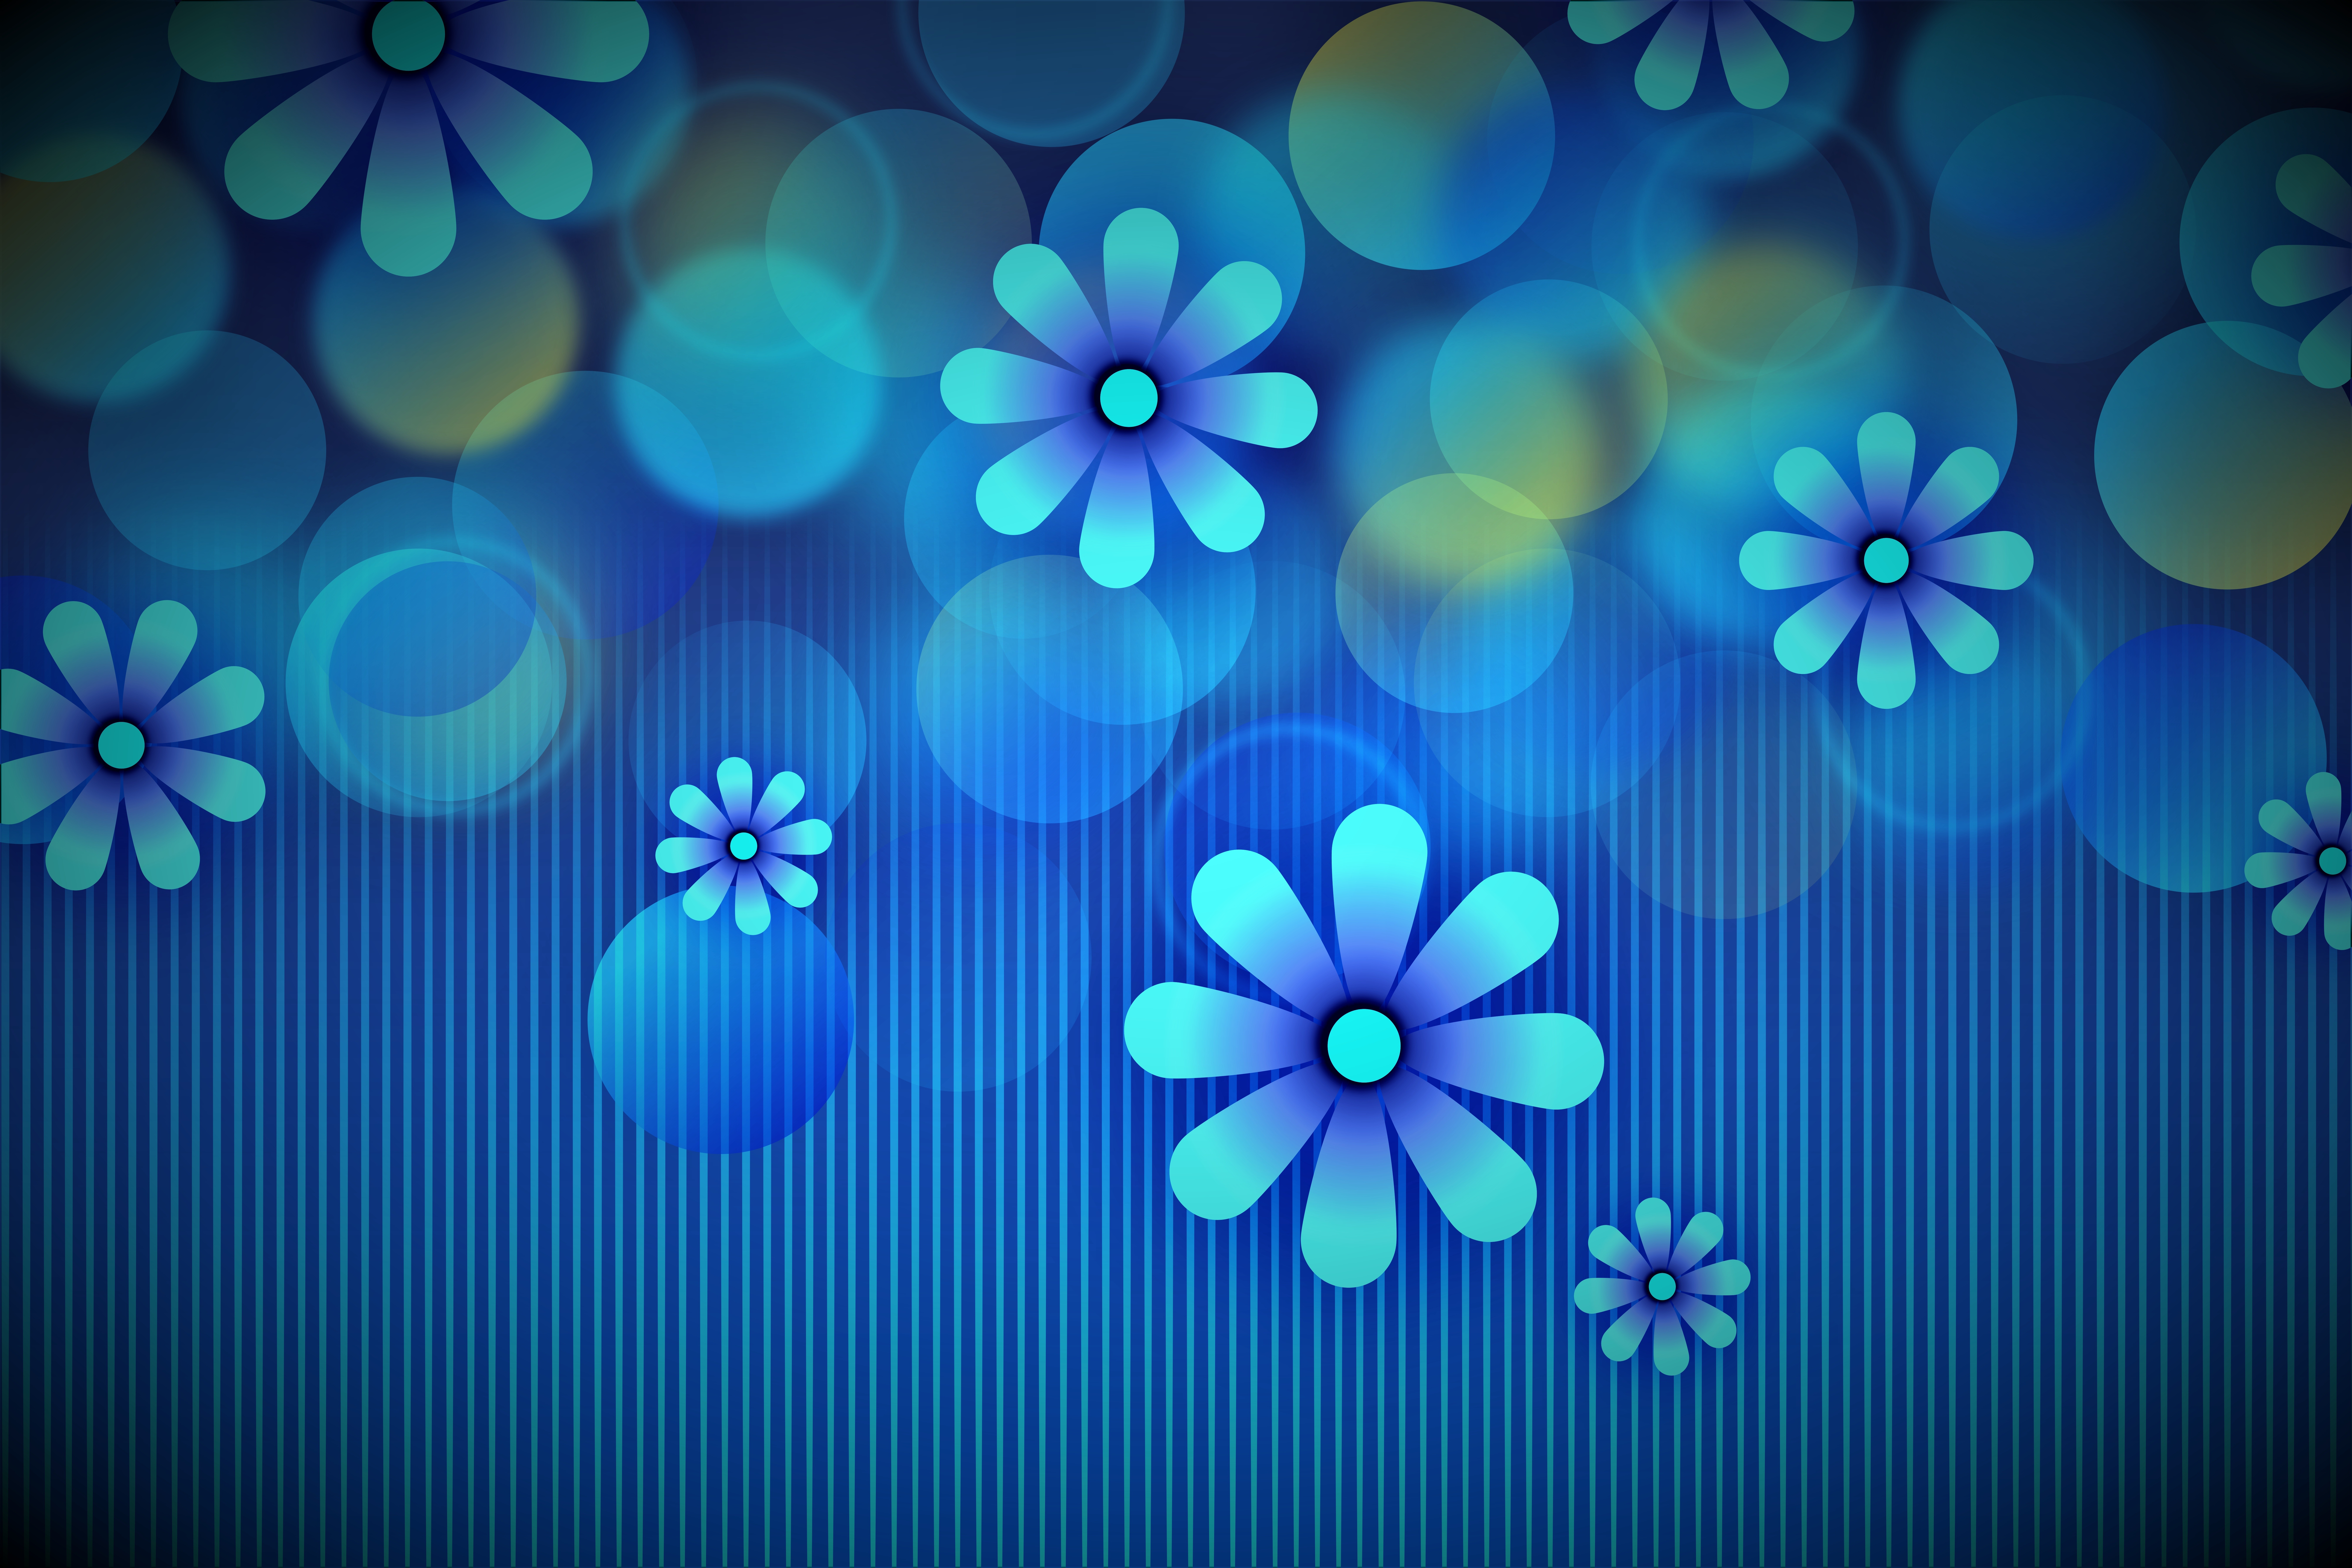 122792 download wallpaper lines, flowers, blue, circles, pattern, texture, textures screensavers and pictures for free